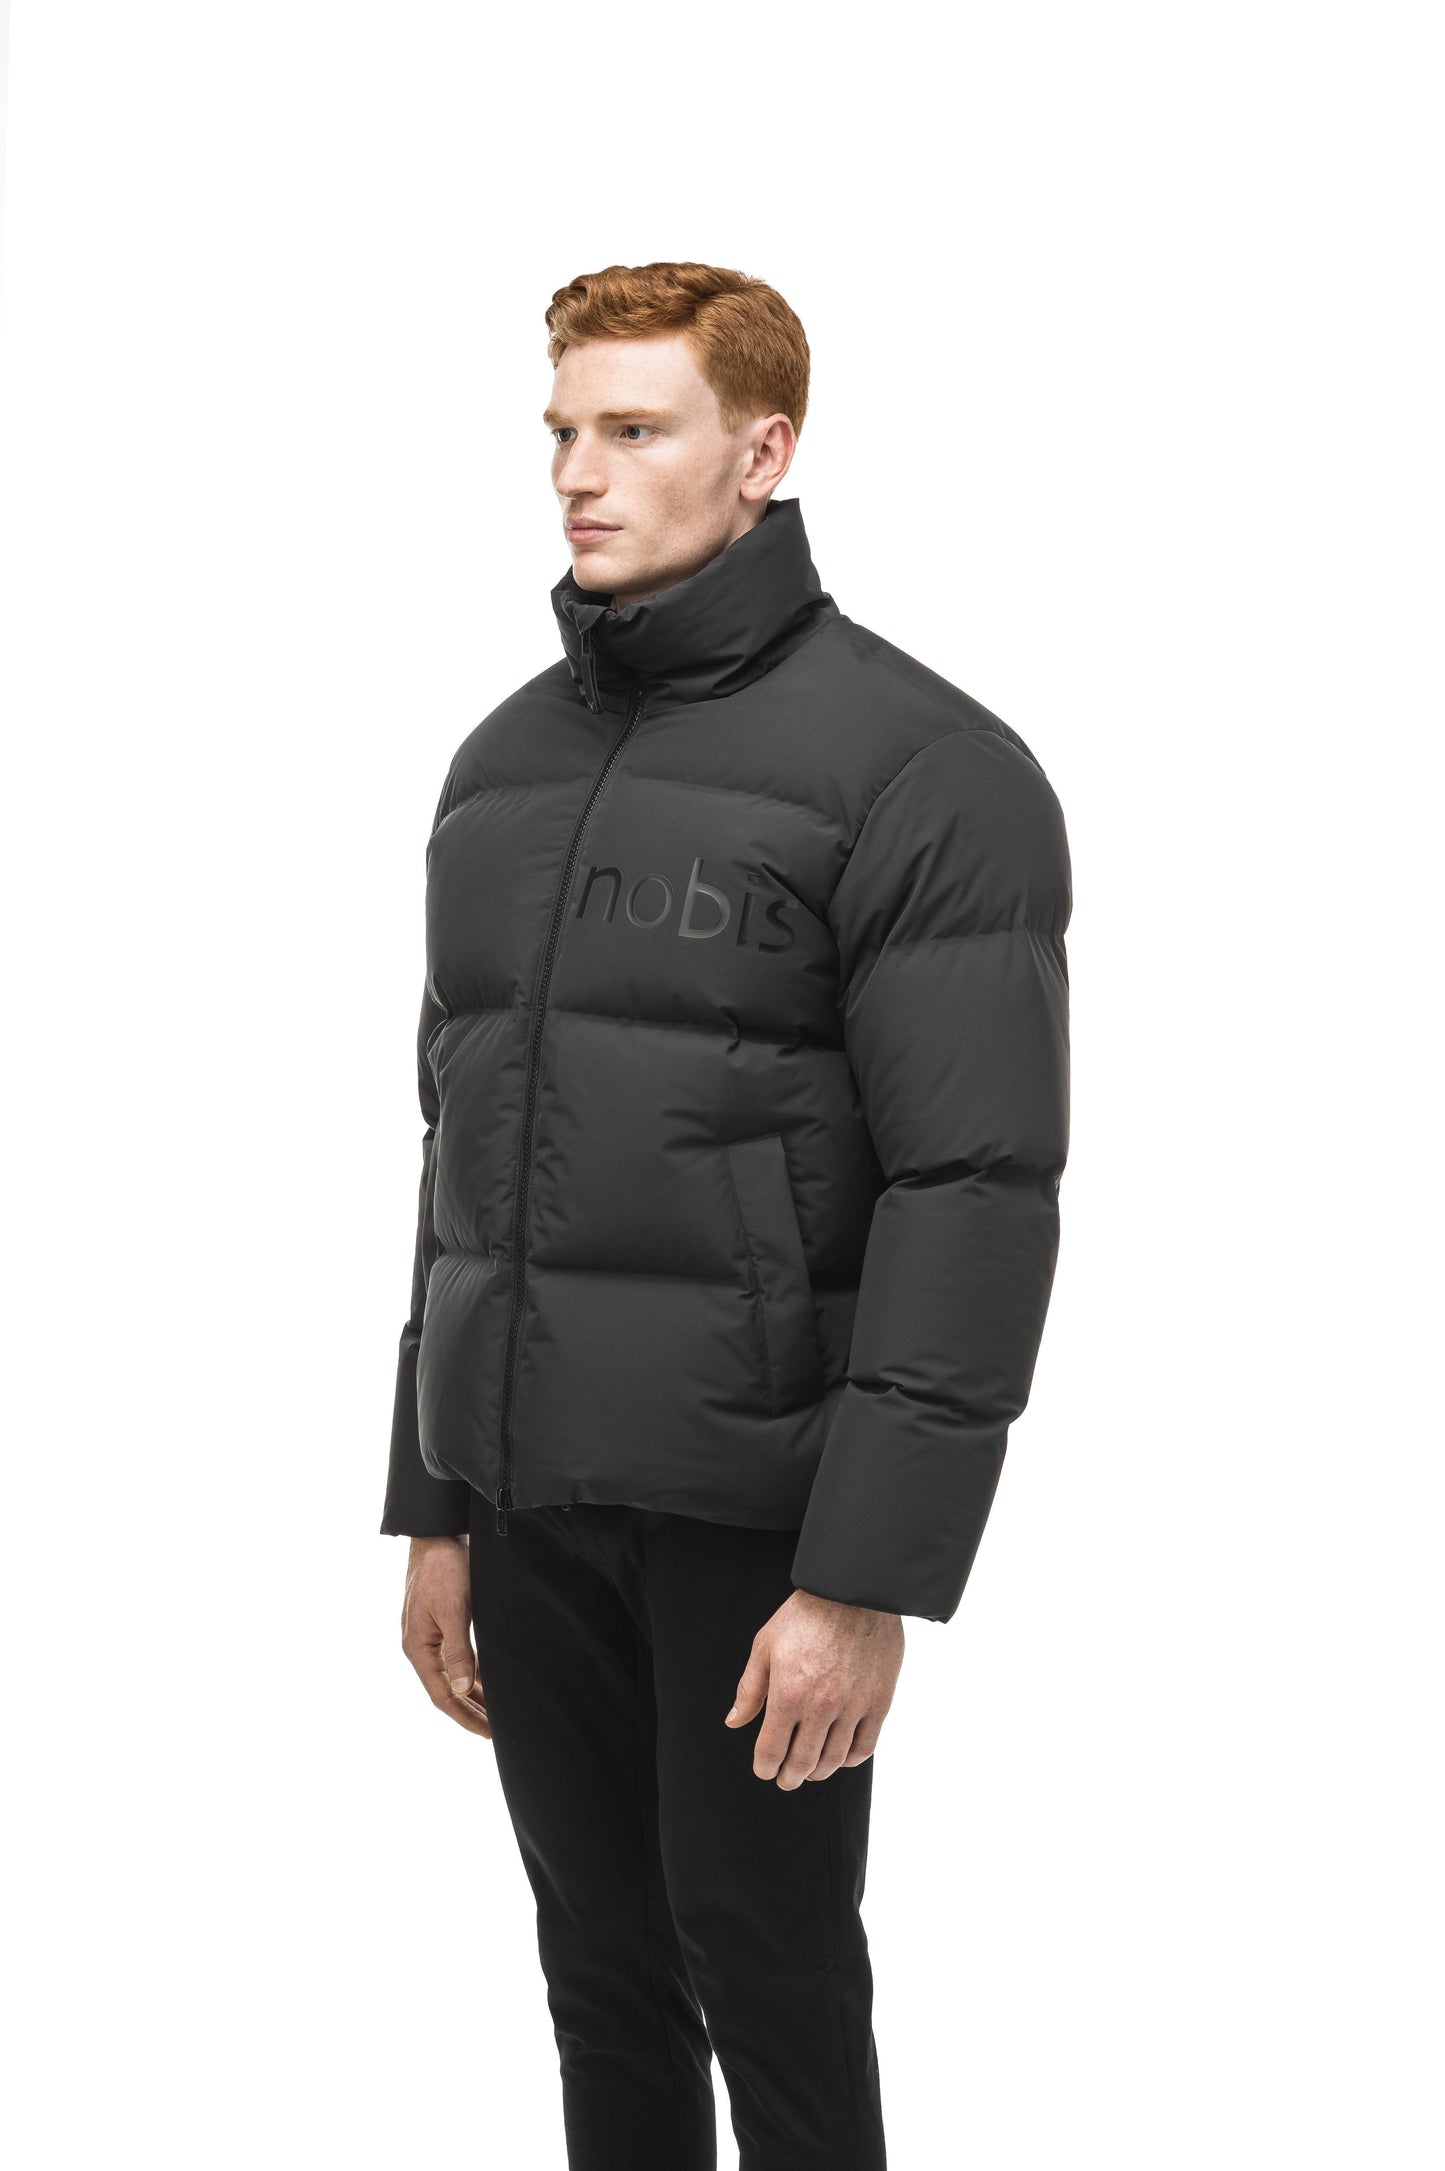 Men's puffer jacket with a minimalist modern design; featuring graphic details like oversized tonal branding, an exposed zipper, and seamless puffer channels in Black